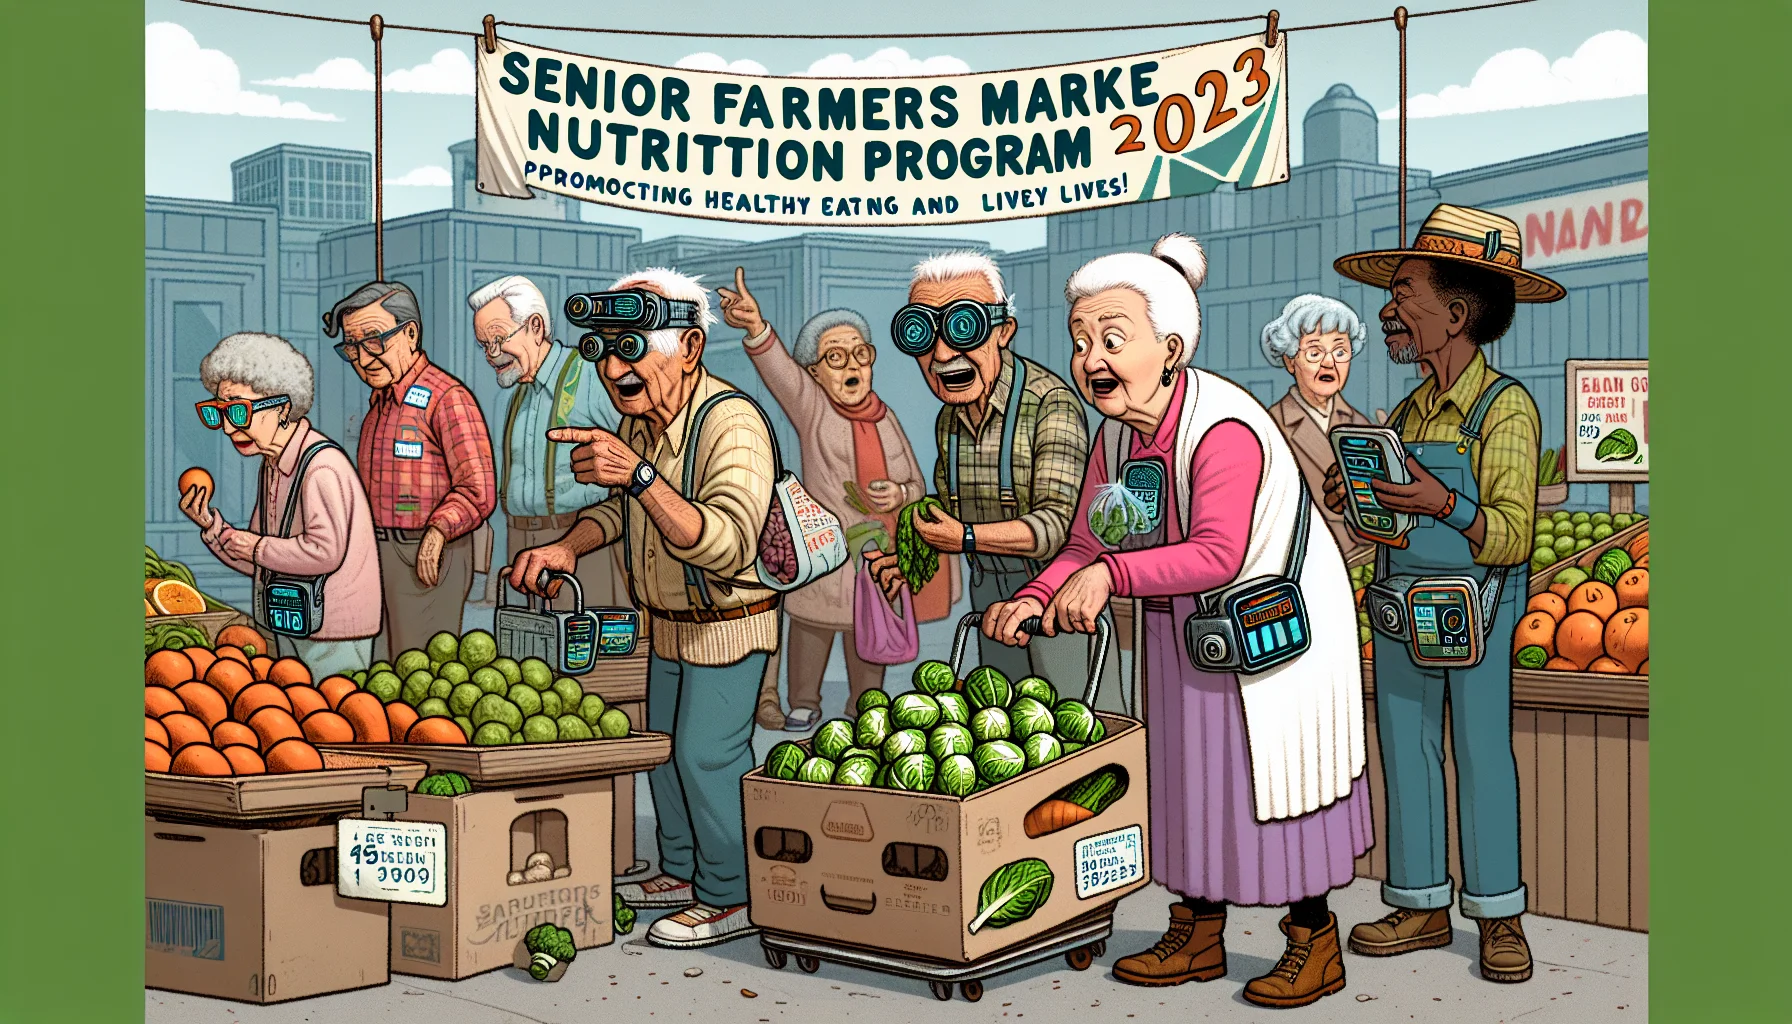 Imagine a quirky scene in a 2023 farmers market dedicated to senior citizens. Several elderly people of different descents, including Caucasian, Black, and South Asian are participating enthusiastically. Some are wearing odd mixtures of vintage and futuristic clothing, inspecting fruits and vegetables with high-tech gadgets. One elderly Hispanic woman is humorously over-packed with bags of fresh produce, while a Middle-Eastern man is haggling for a bag of organic brussels sprouts. A sign hanging prominently says, 'Senior Farmers Market Nutrition Program 2023 - Promoting Healthy Eating and Lively Lives!'